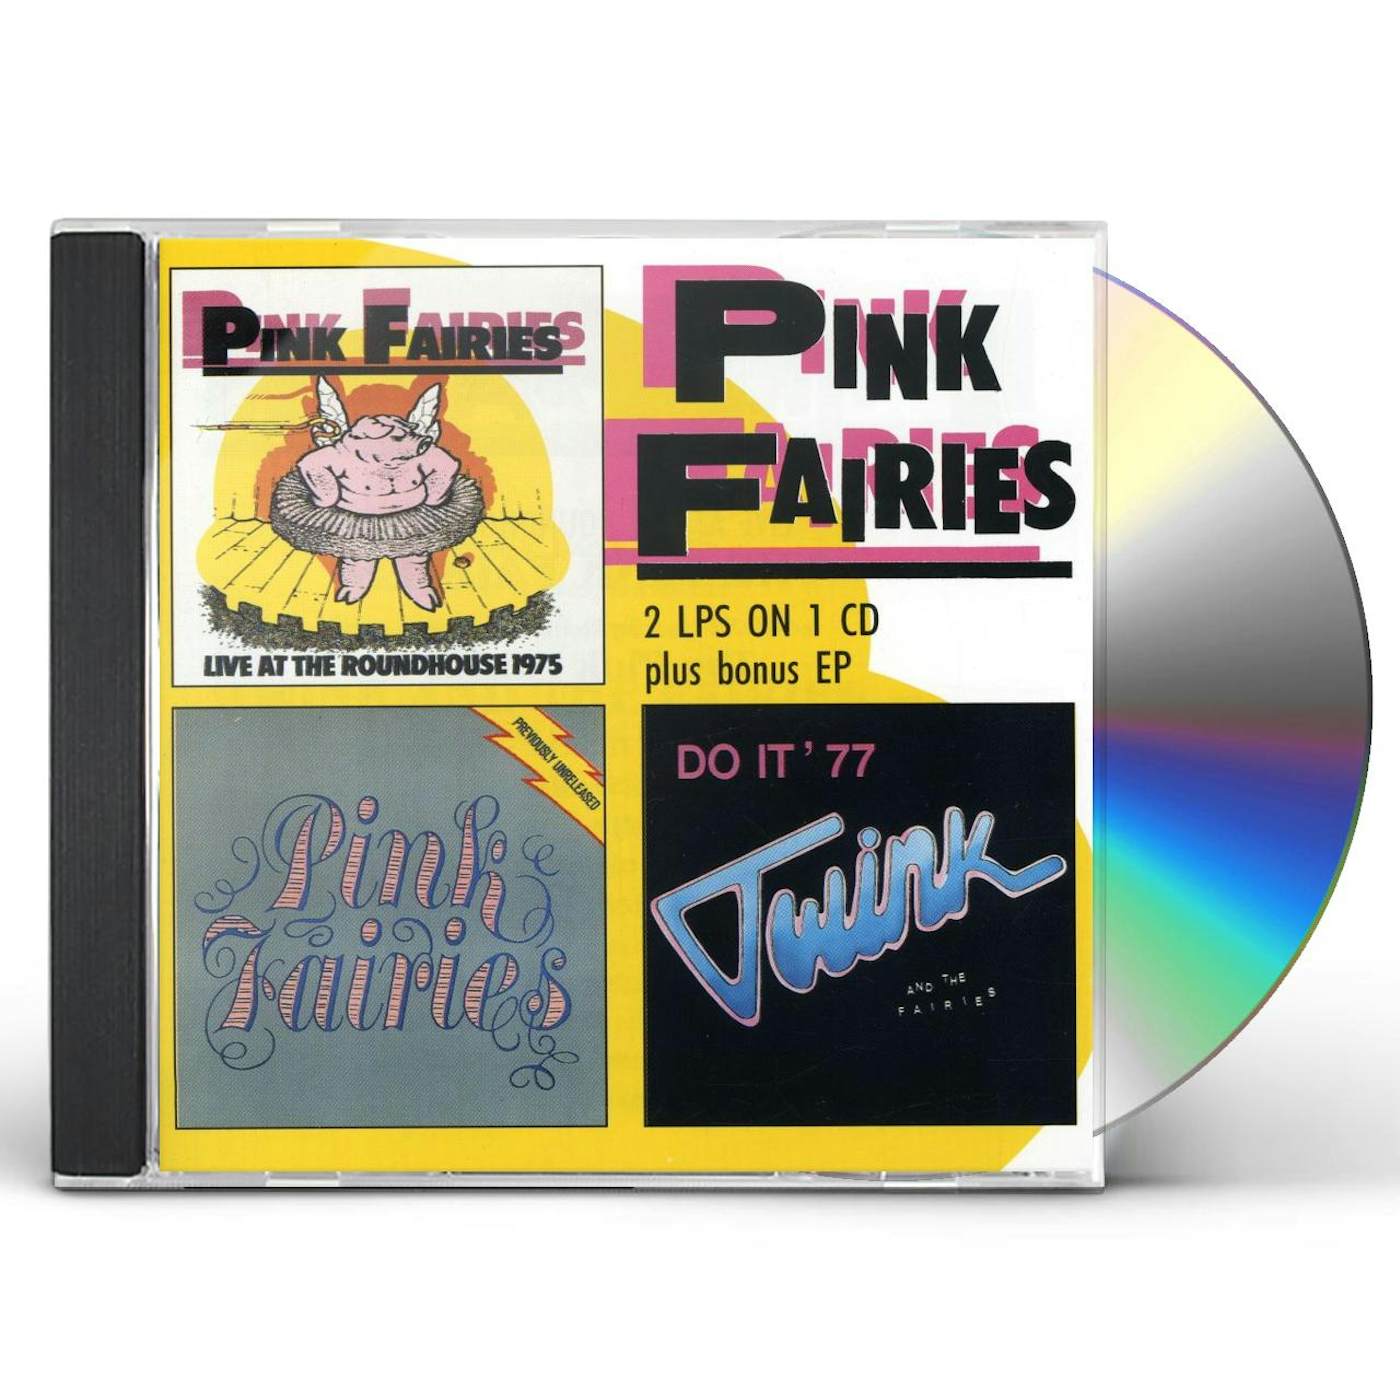 The Pink Fairies LIVE AT ROUNDHOUSE / PREVIOUSLY UNRELEASED / DO IT CD